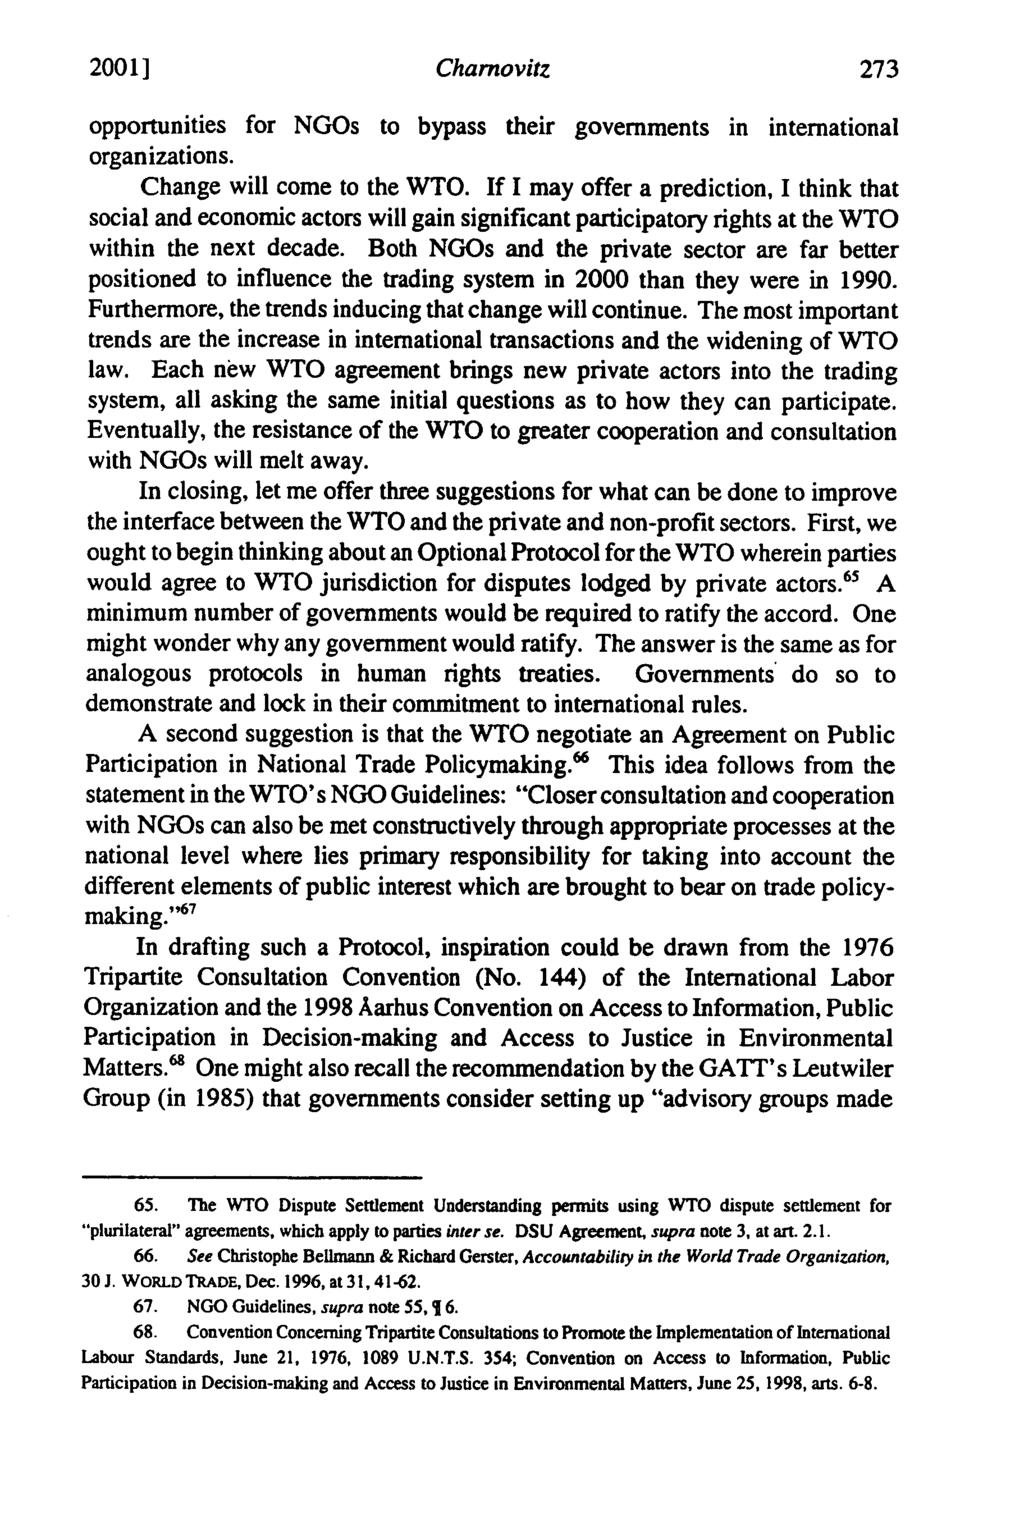 2001] Charnovitz opportunities for NGOs to bypass their governments in international organizations. Change will come to the WTO.